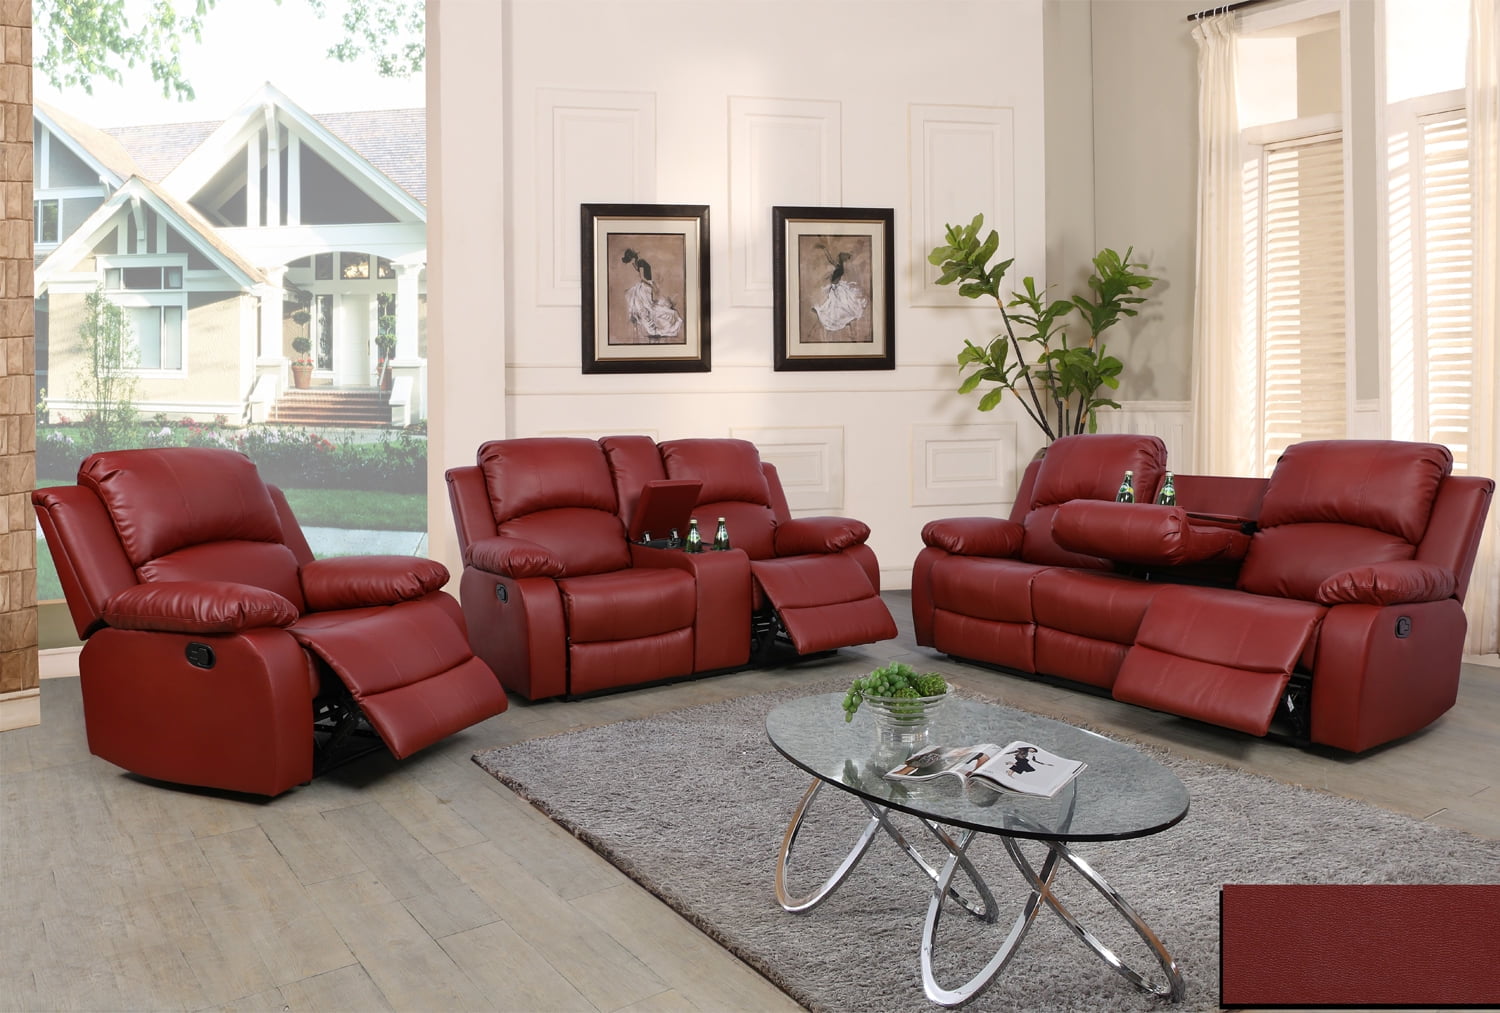 Ainehome Red Leather Recliner Loveseat